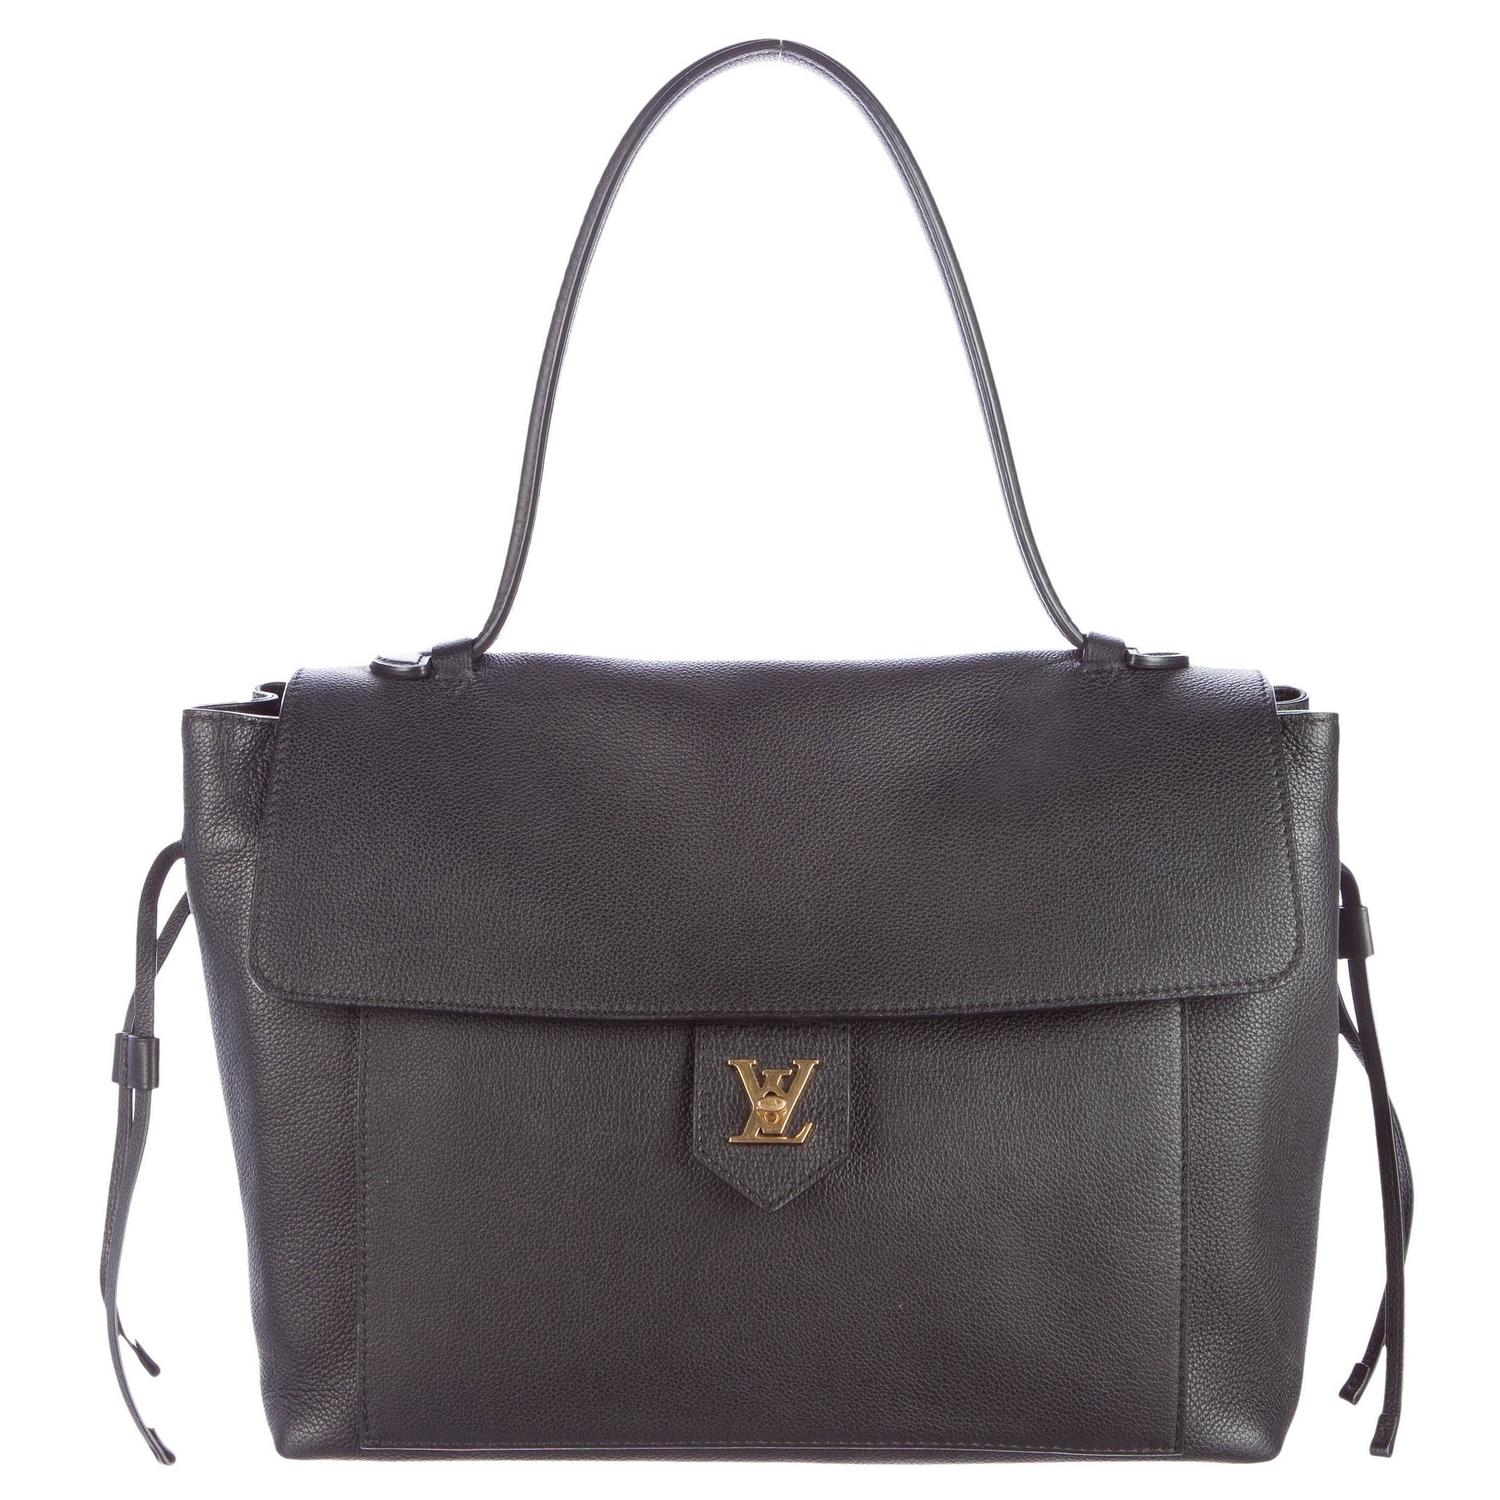 Louis Vuitton Ltd Edition Black Leather Gold Logo Top Handle Tote Bag in Box For Sale at 1stdibs